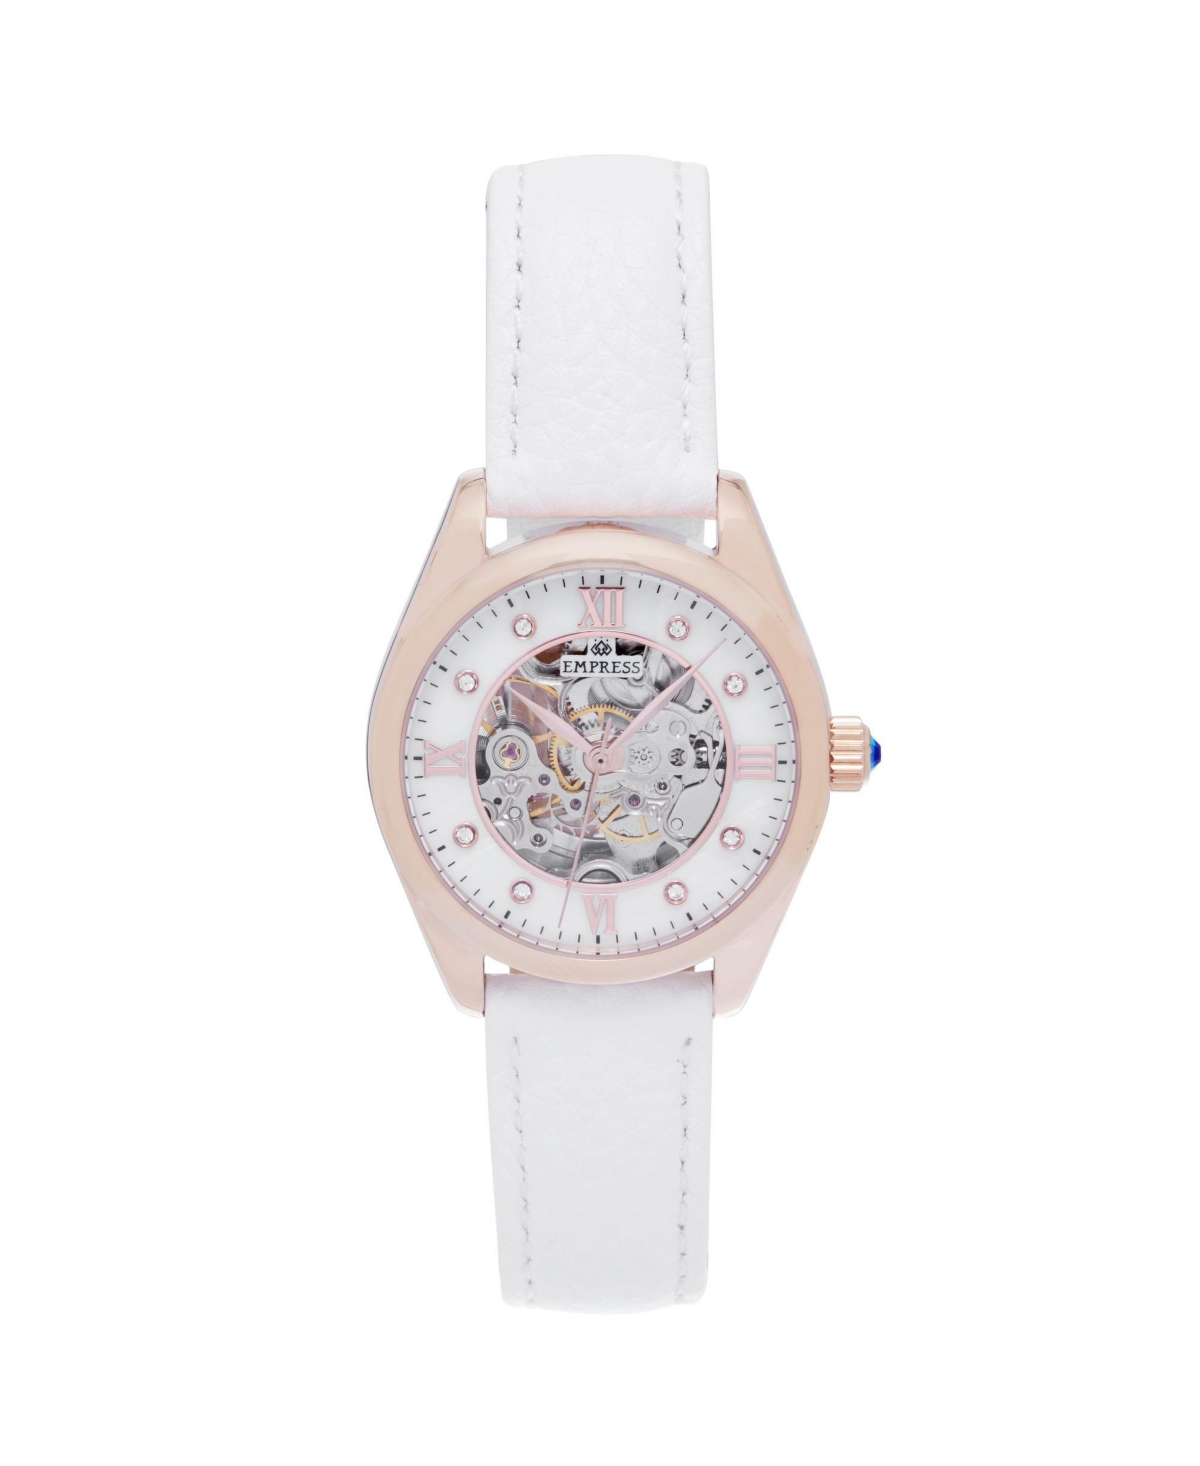 Women Magnolia Leather Watch - White/Rose Gold, 37mm - White/rose gold